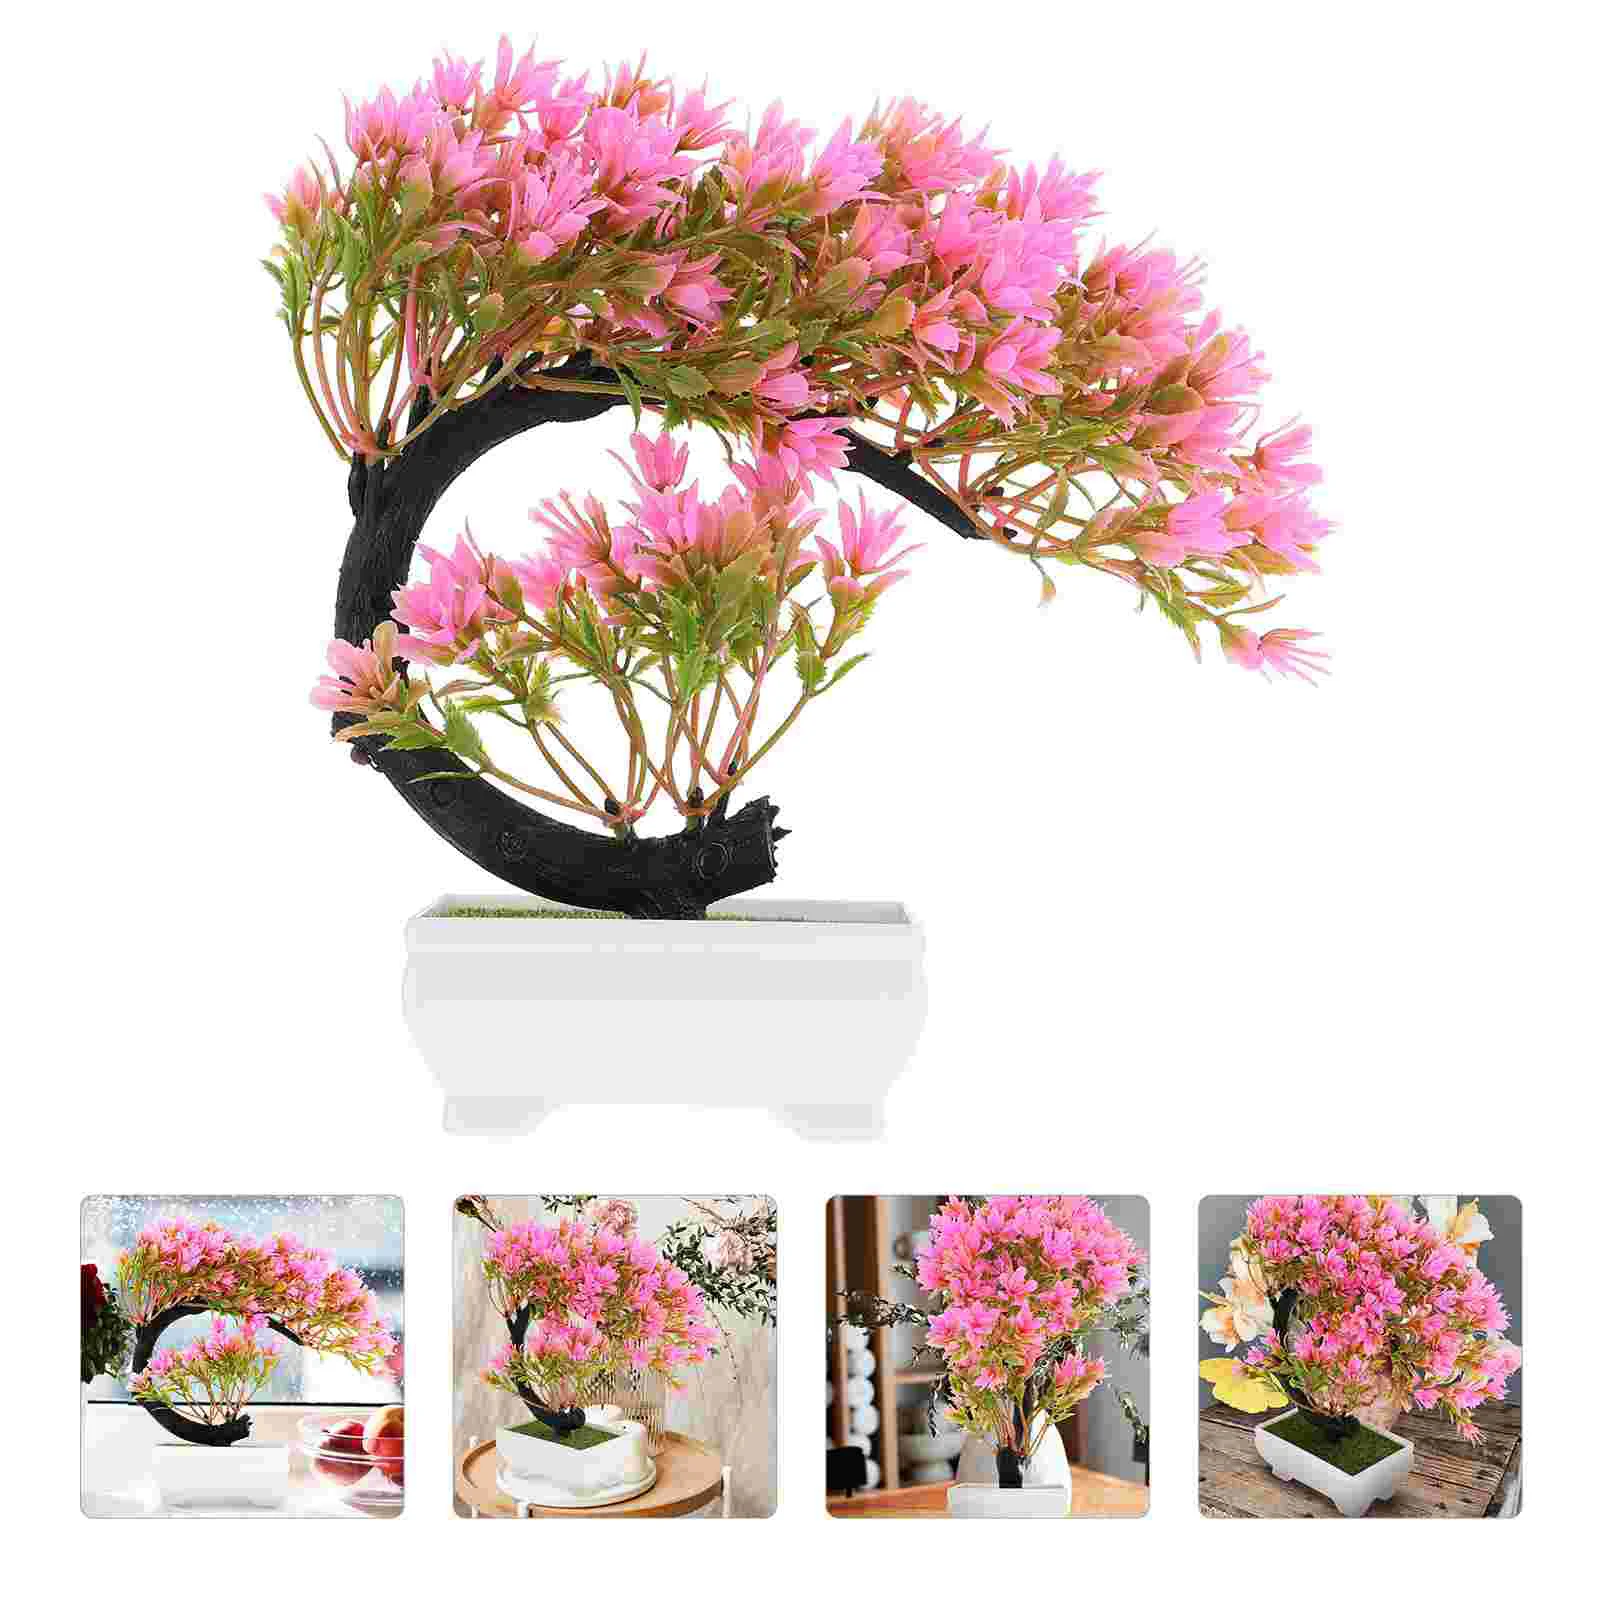 

Bonsai Tree Fake Artificial Potted Faux Realistic Flower Green Decor Decorative Pine Brussel S Indoor Red Japanese Bonzie Pot